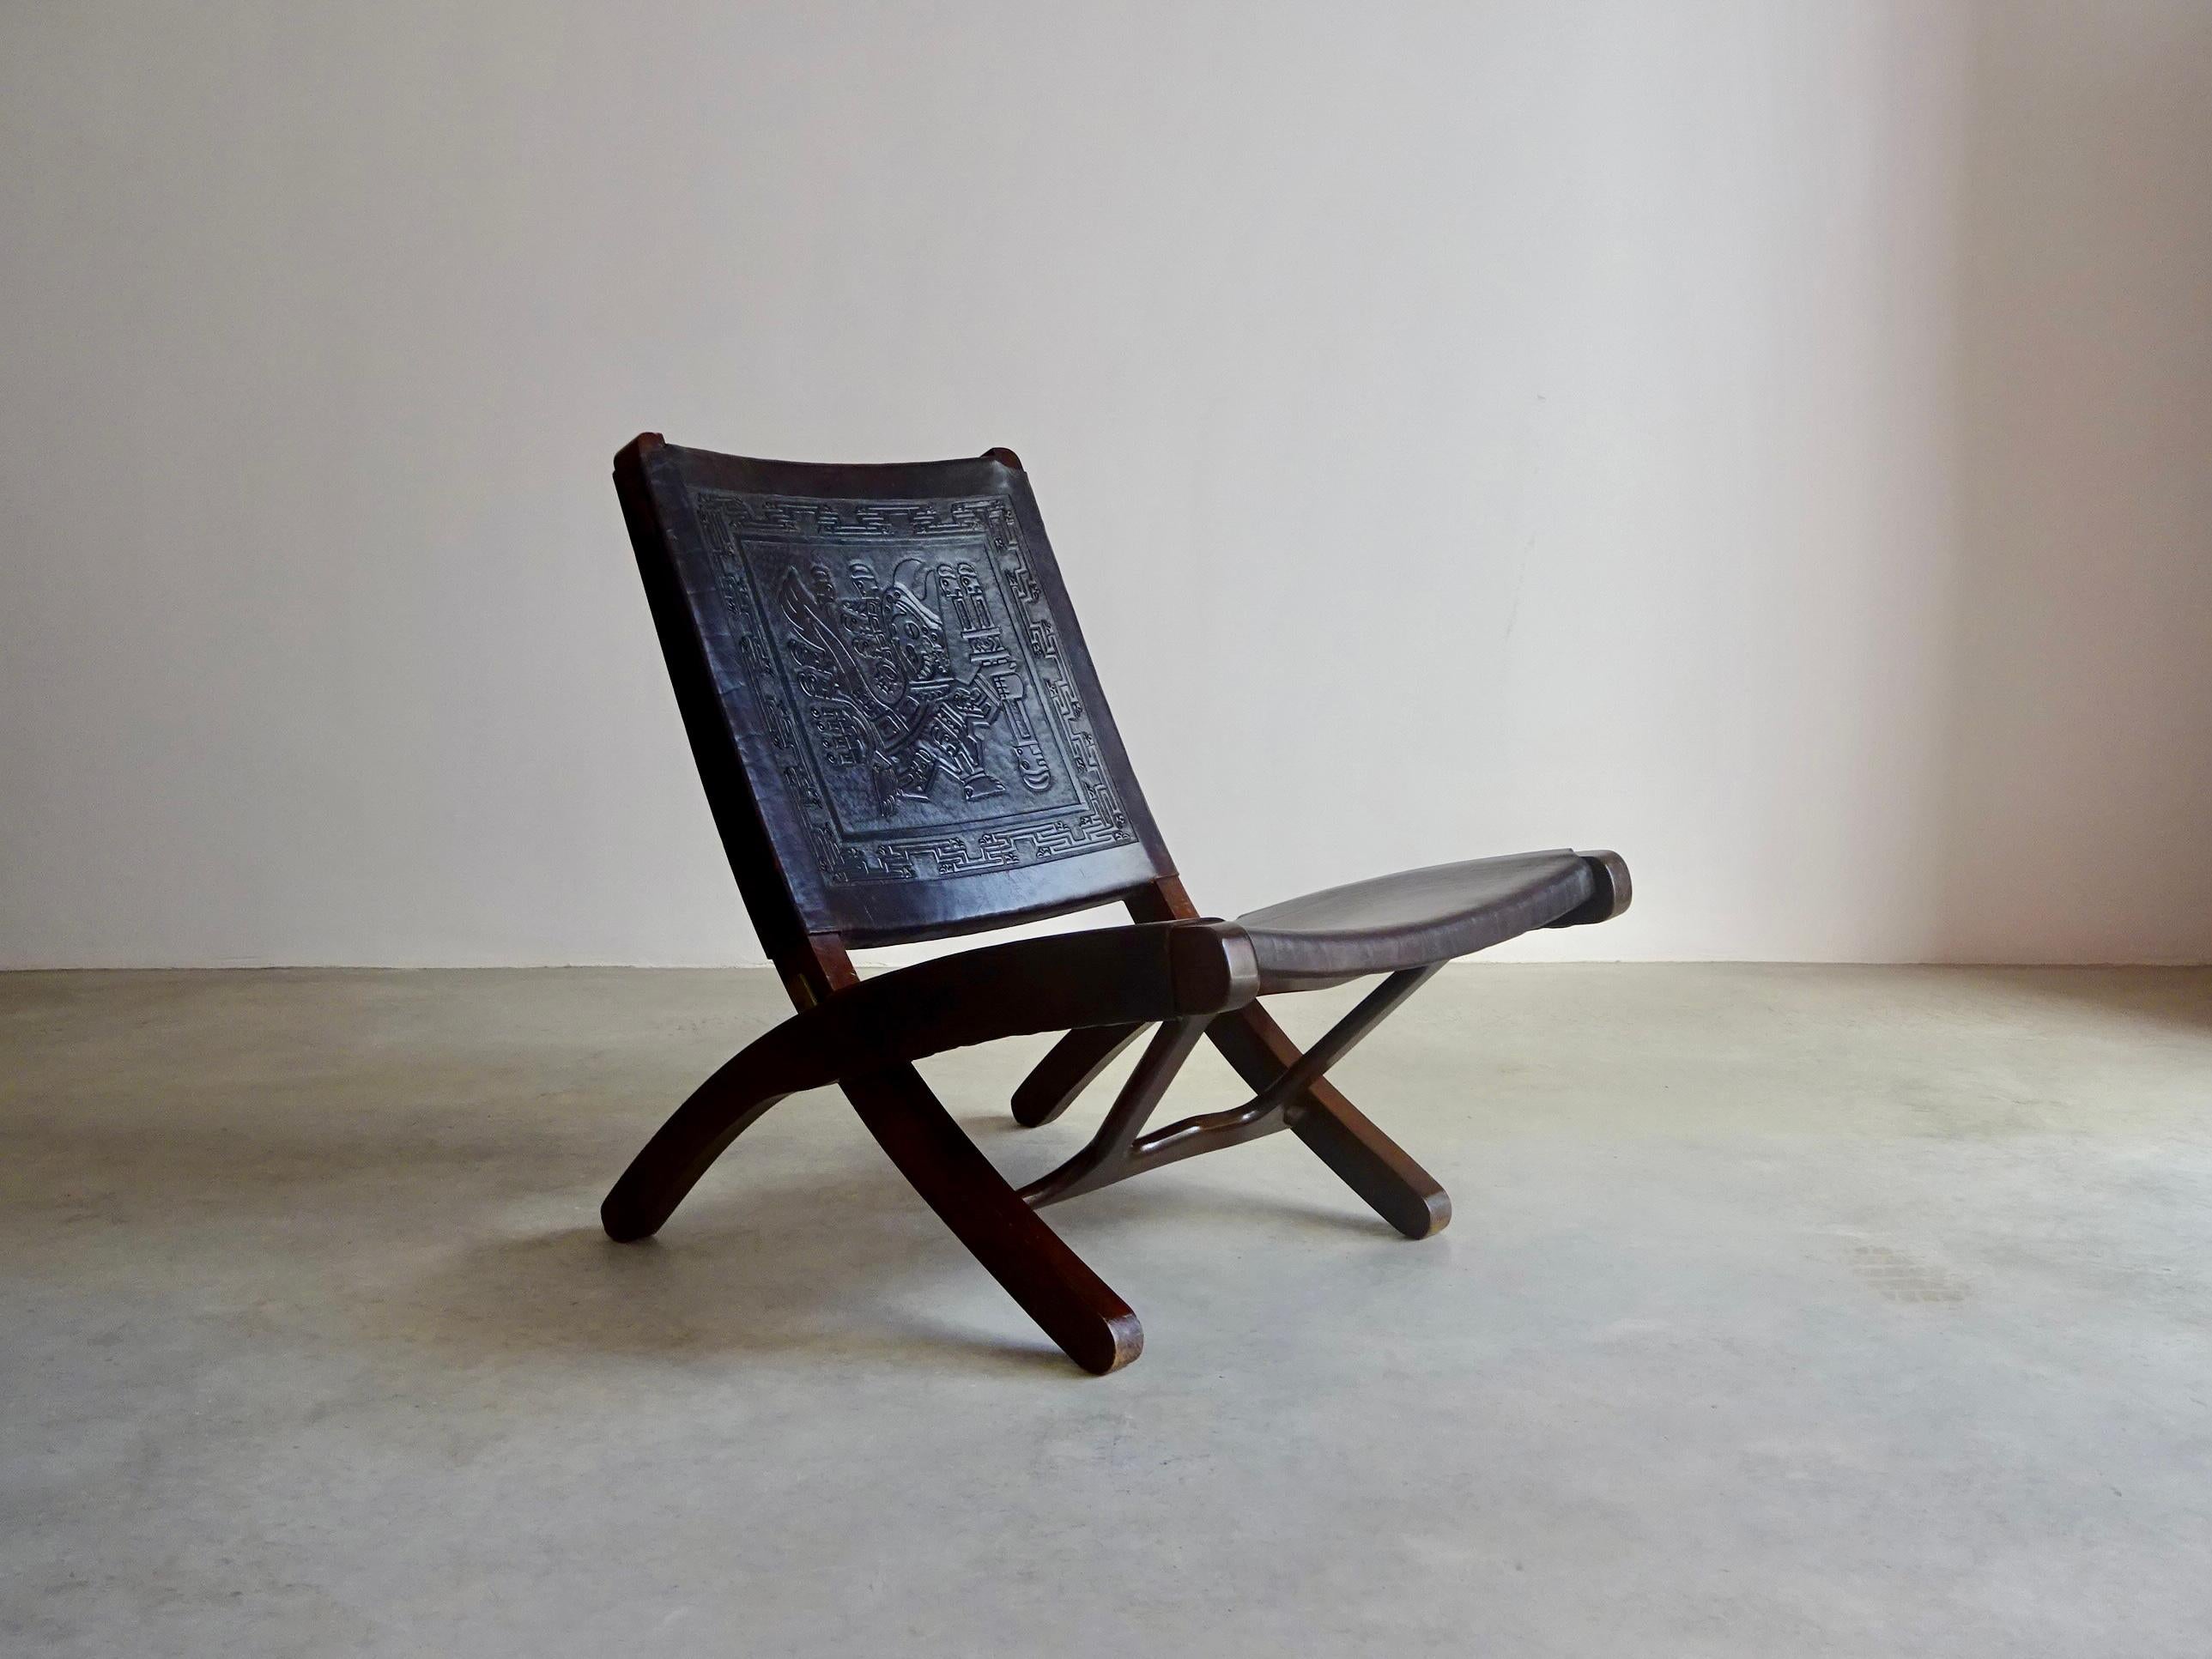 Folding chair designed in the 60s by Ángel Pazmiño for Muebles de Estilo (Ecuador).
The structure is made of solid meranti wood and thick brown leather. The embossed leather on the backrest shows pre-Columbian inspired motifs. Solid brass hinges.